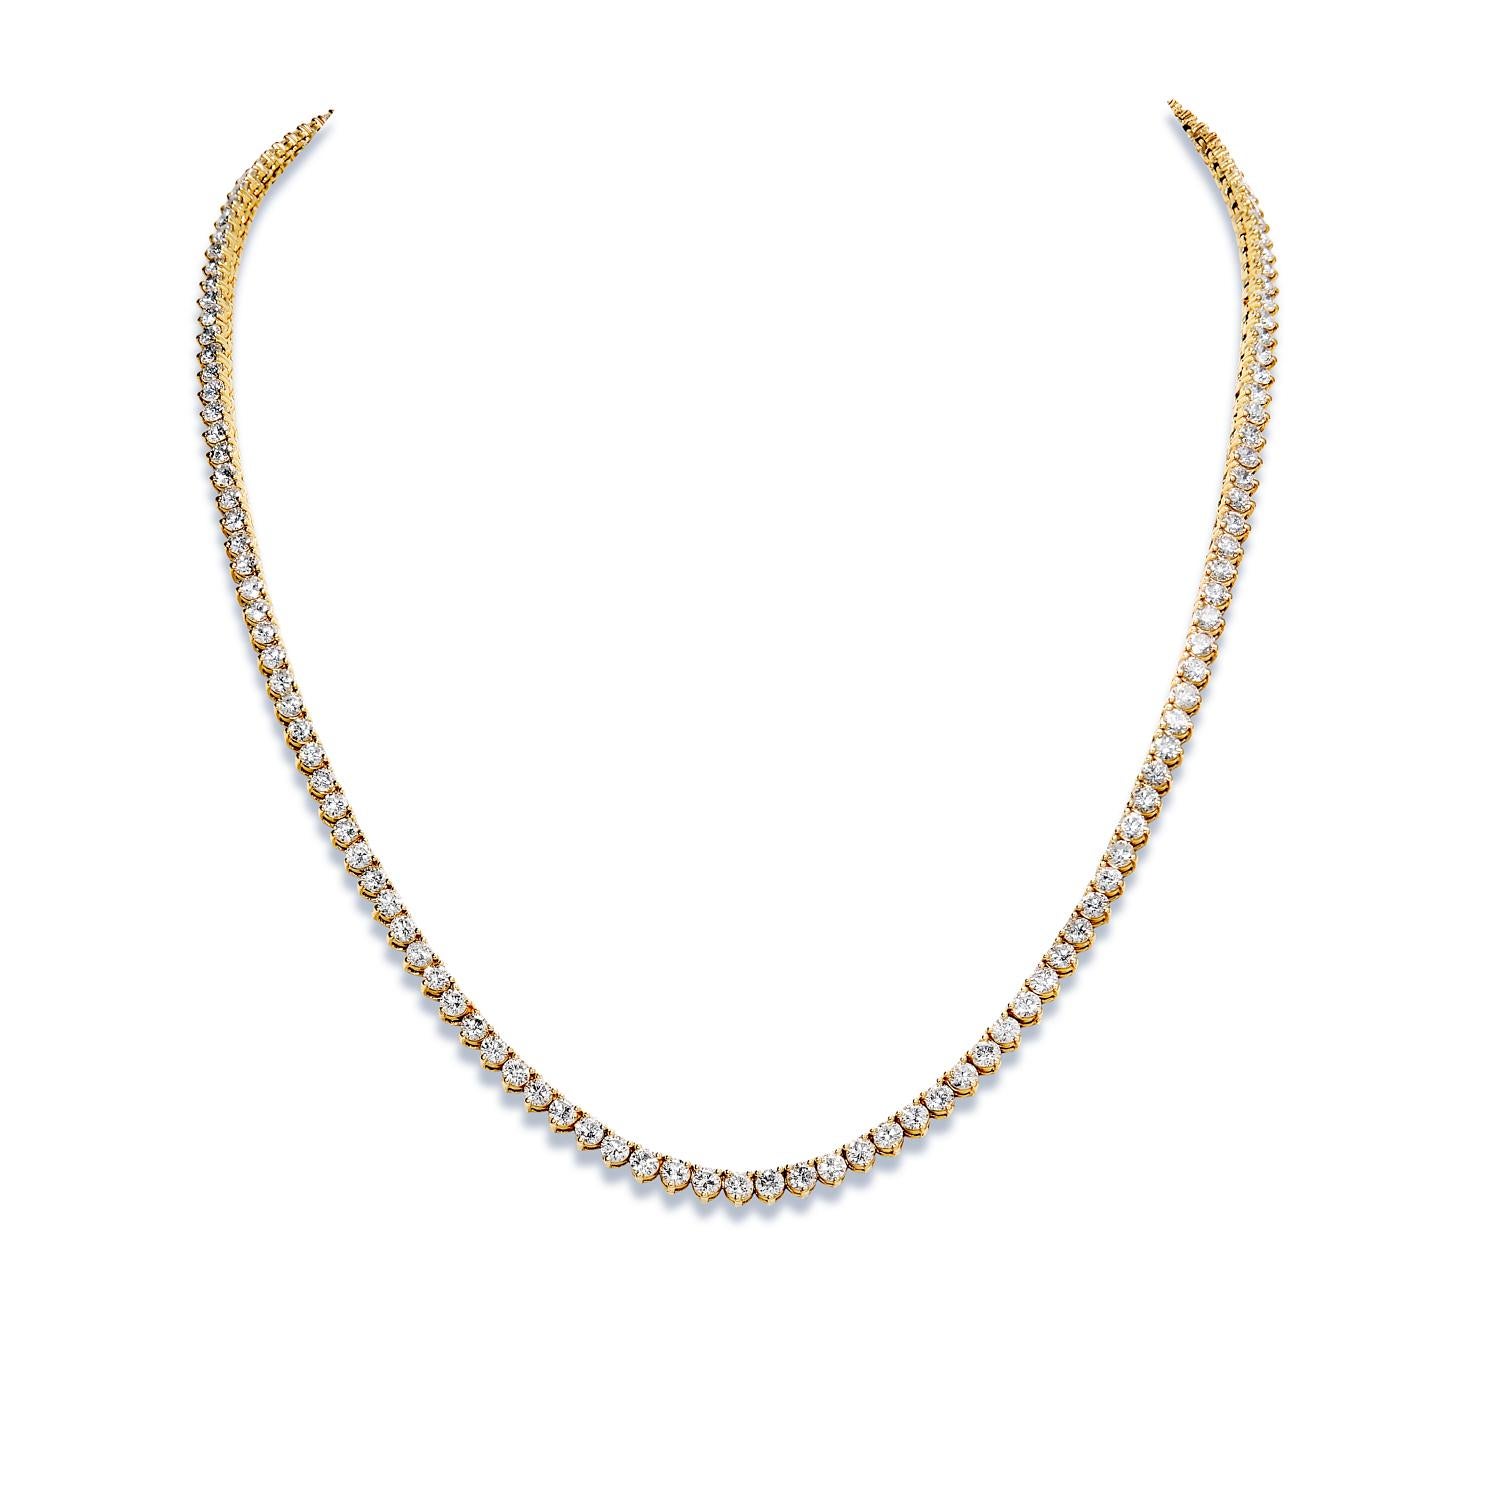 Earth Mined Diamond:
Carat Weight: 26.17 Carats
Number of Diamonds 179
Style: Round Brilliant Cut
Setting: 3 Round Prong
Chains: 14 Karat Yellow Gold 49.00 grams
Measurements: 26.5 Inches